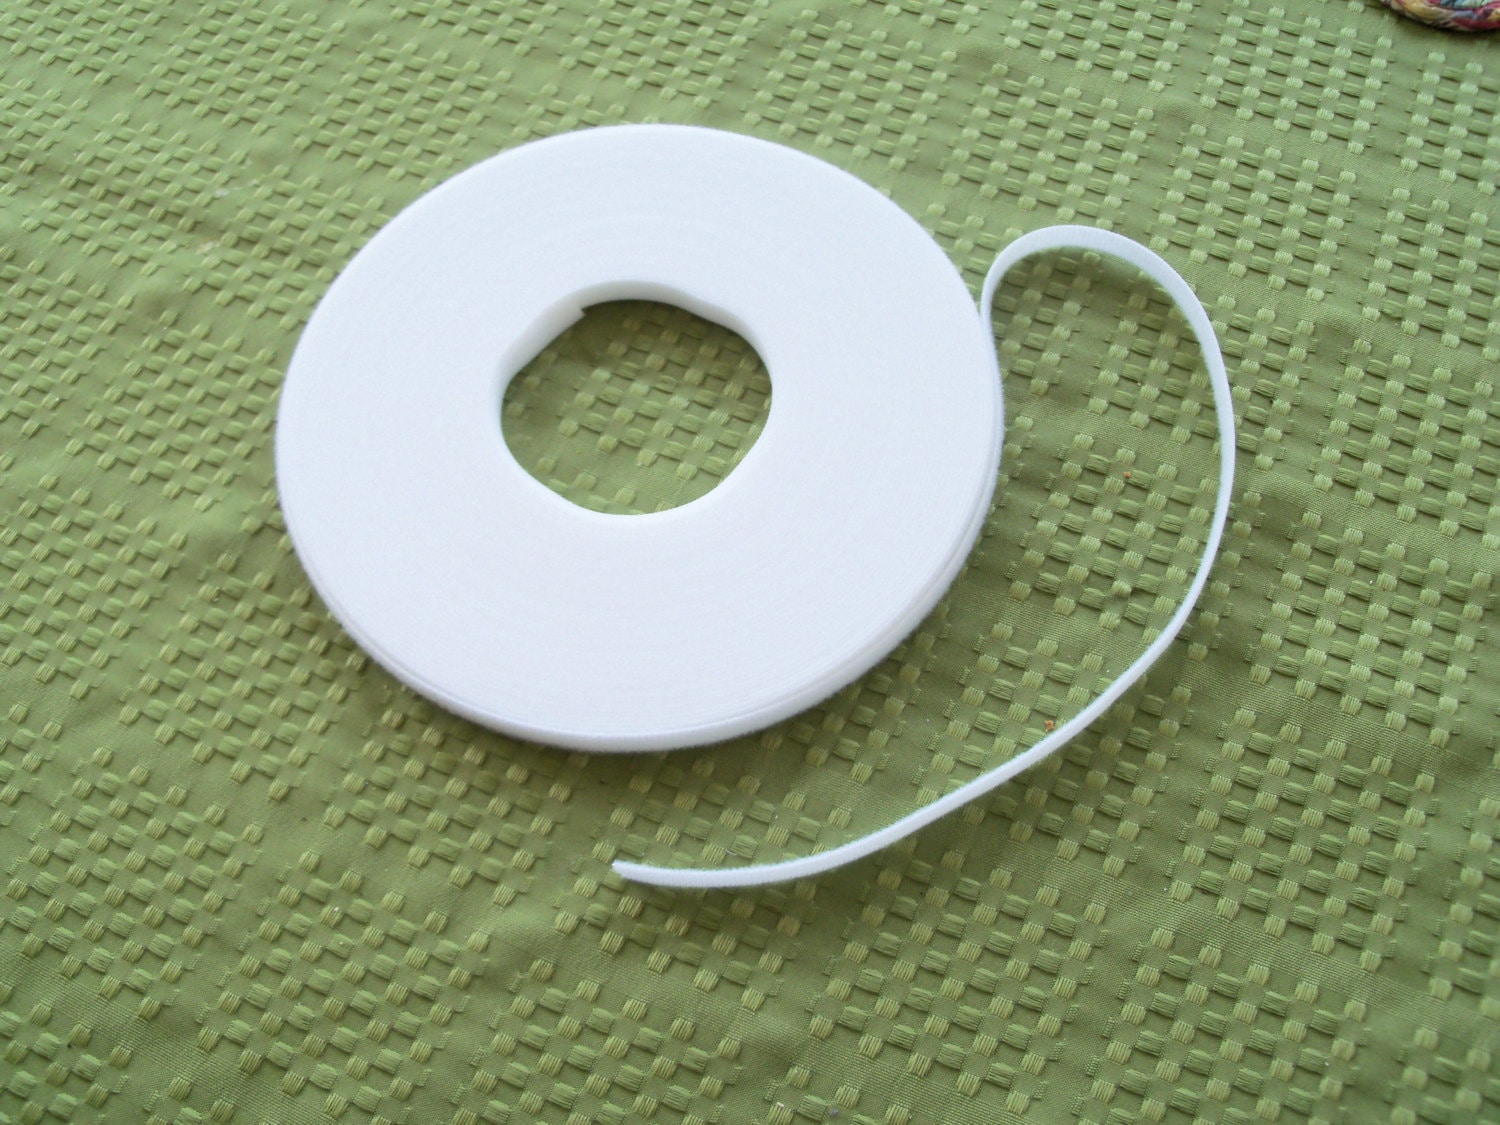 Ultra Thin VELCRO® Brand Double Sided Hook & Loop Tape One1 Yard 3